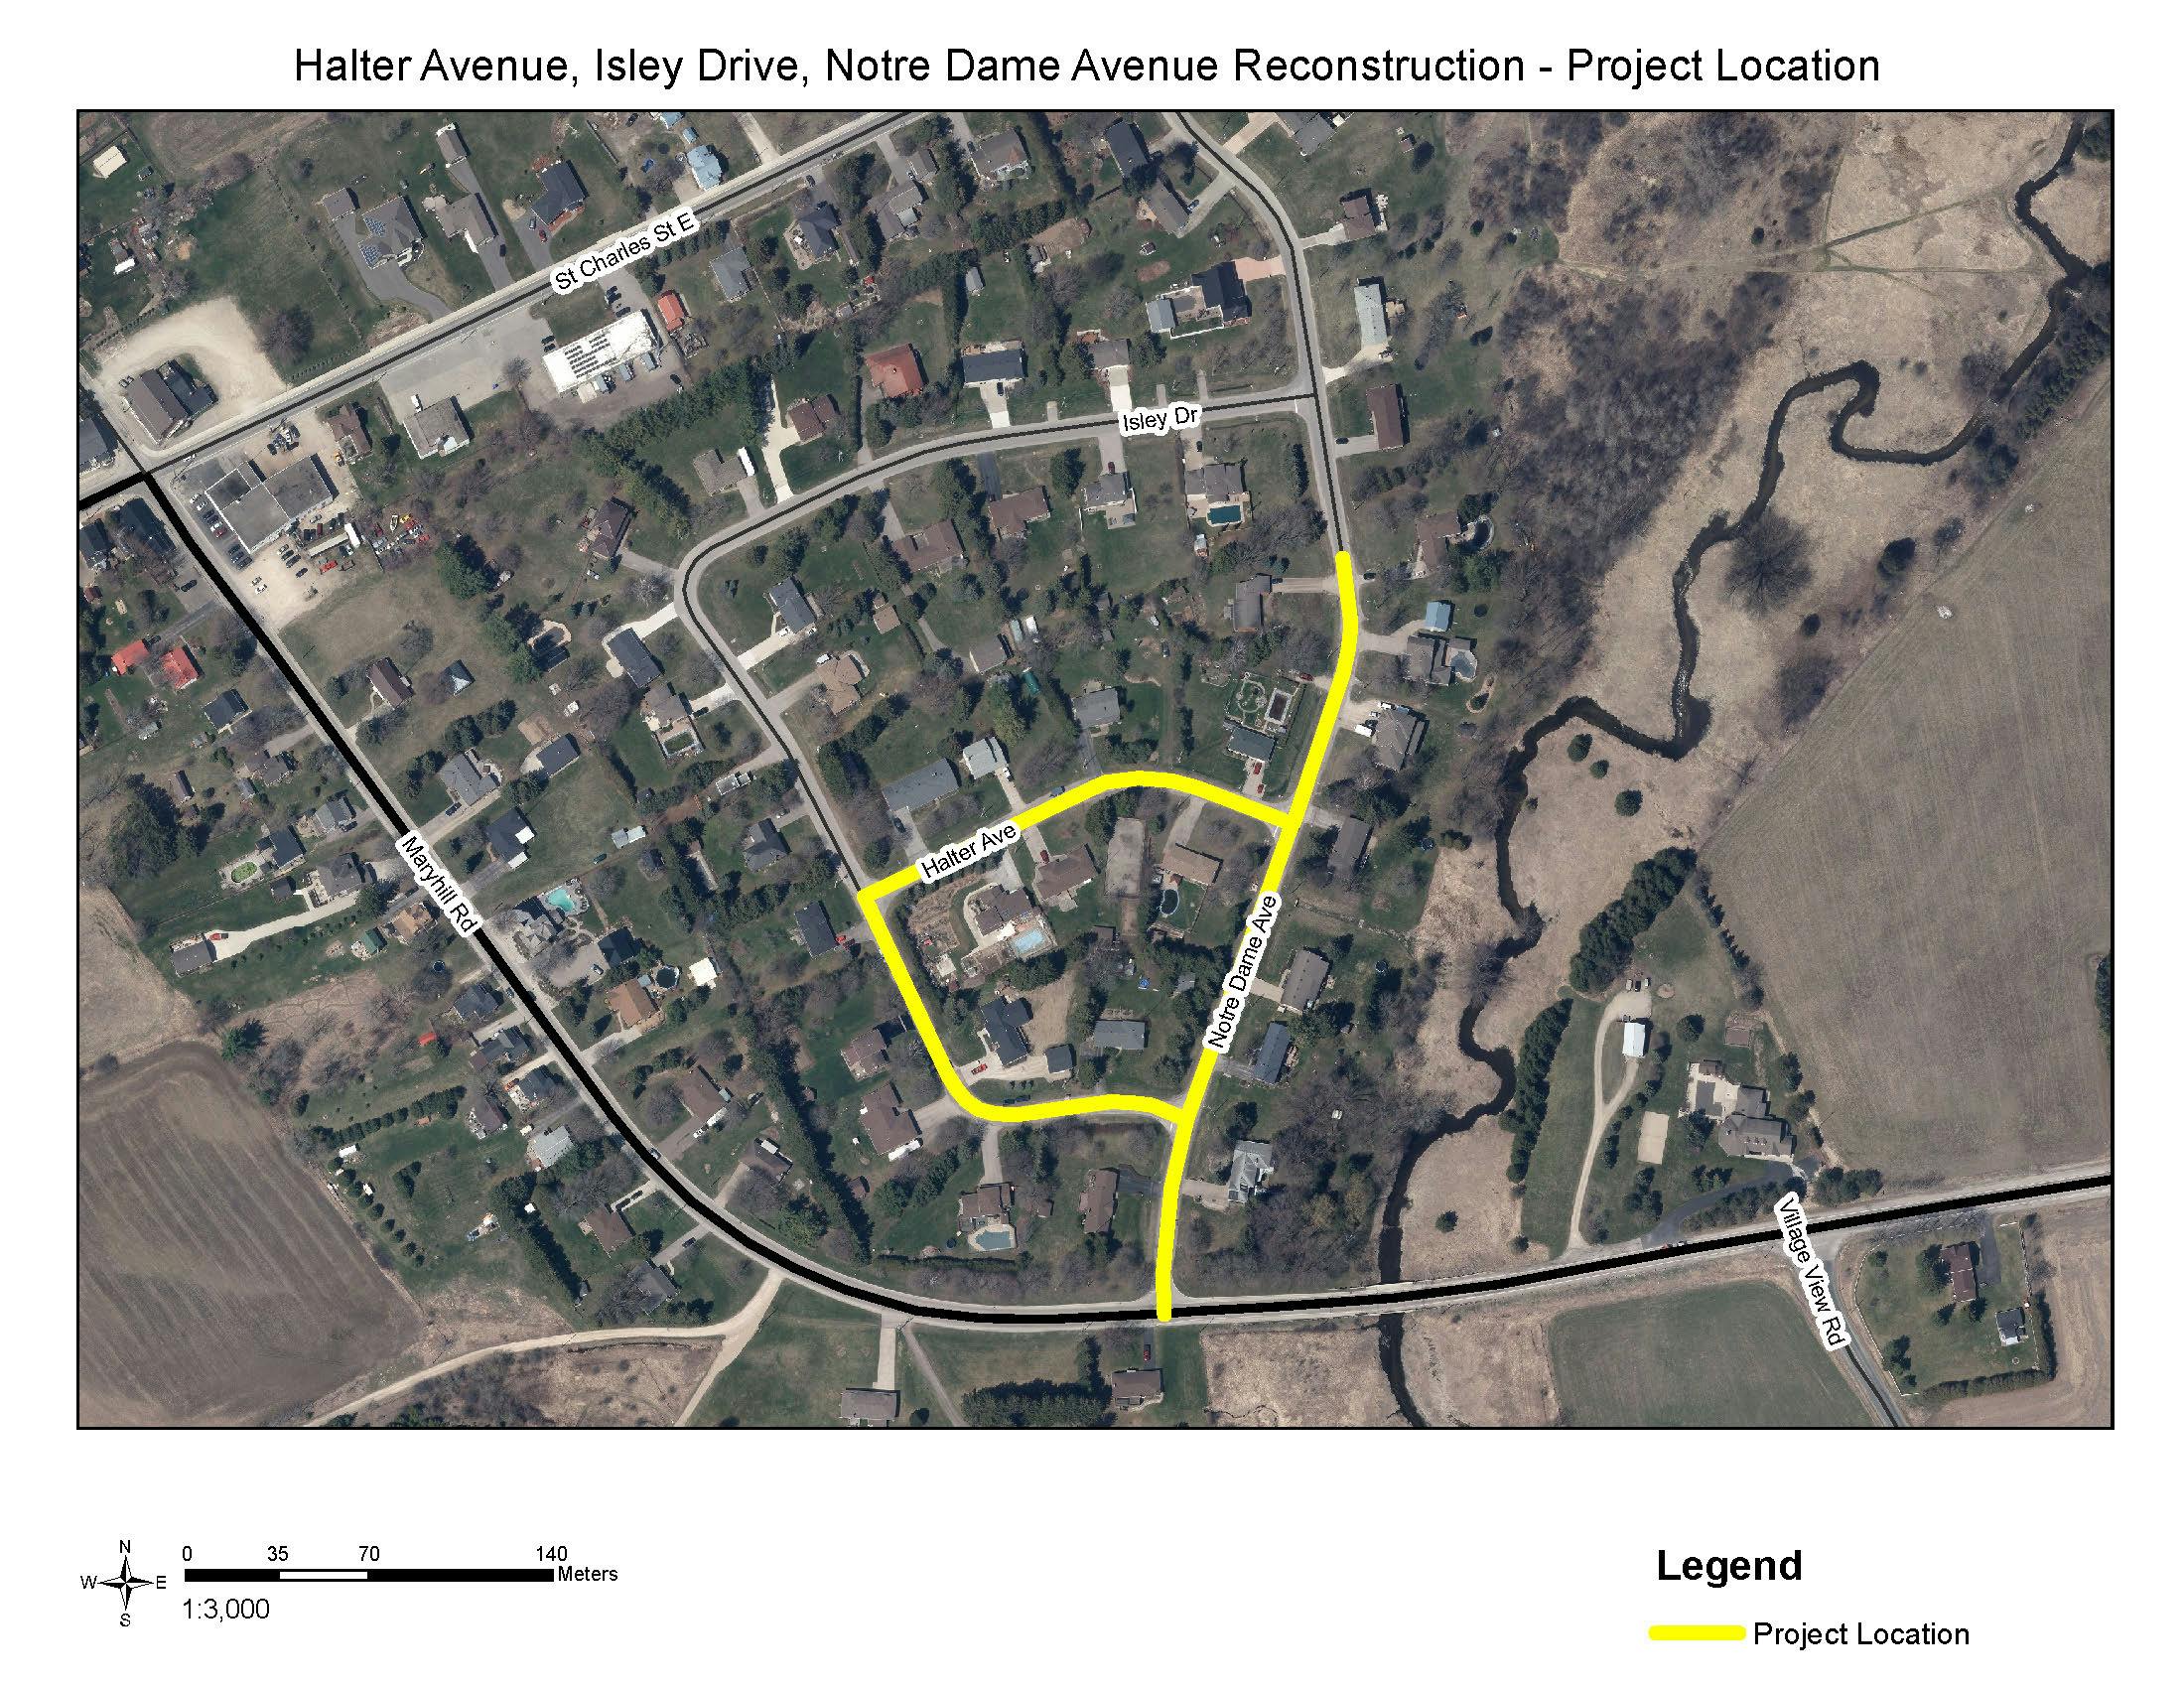 Halter Ave, Isley Dr, Notre Dame Ave Reconstruction.jpg